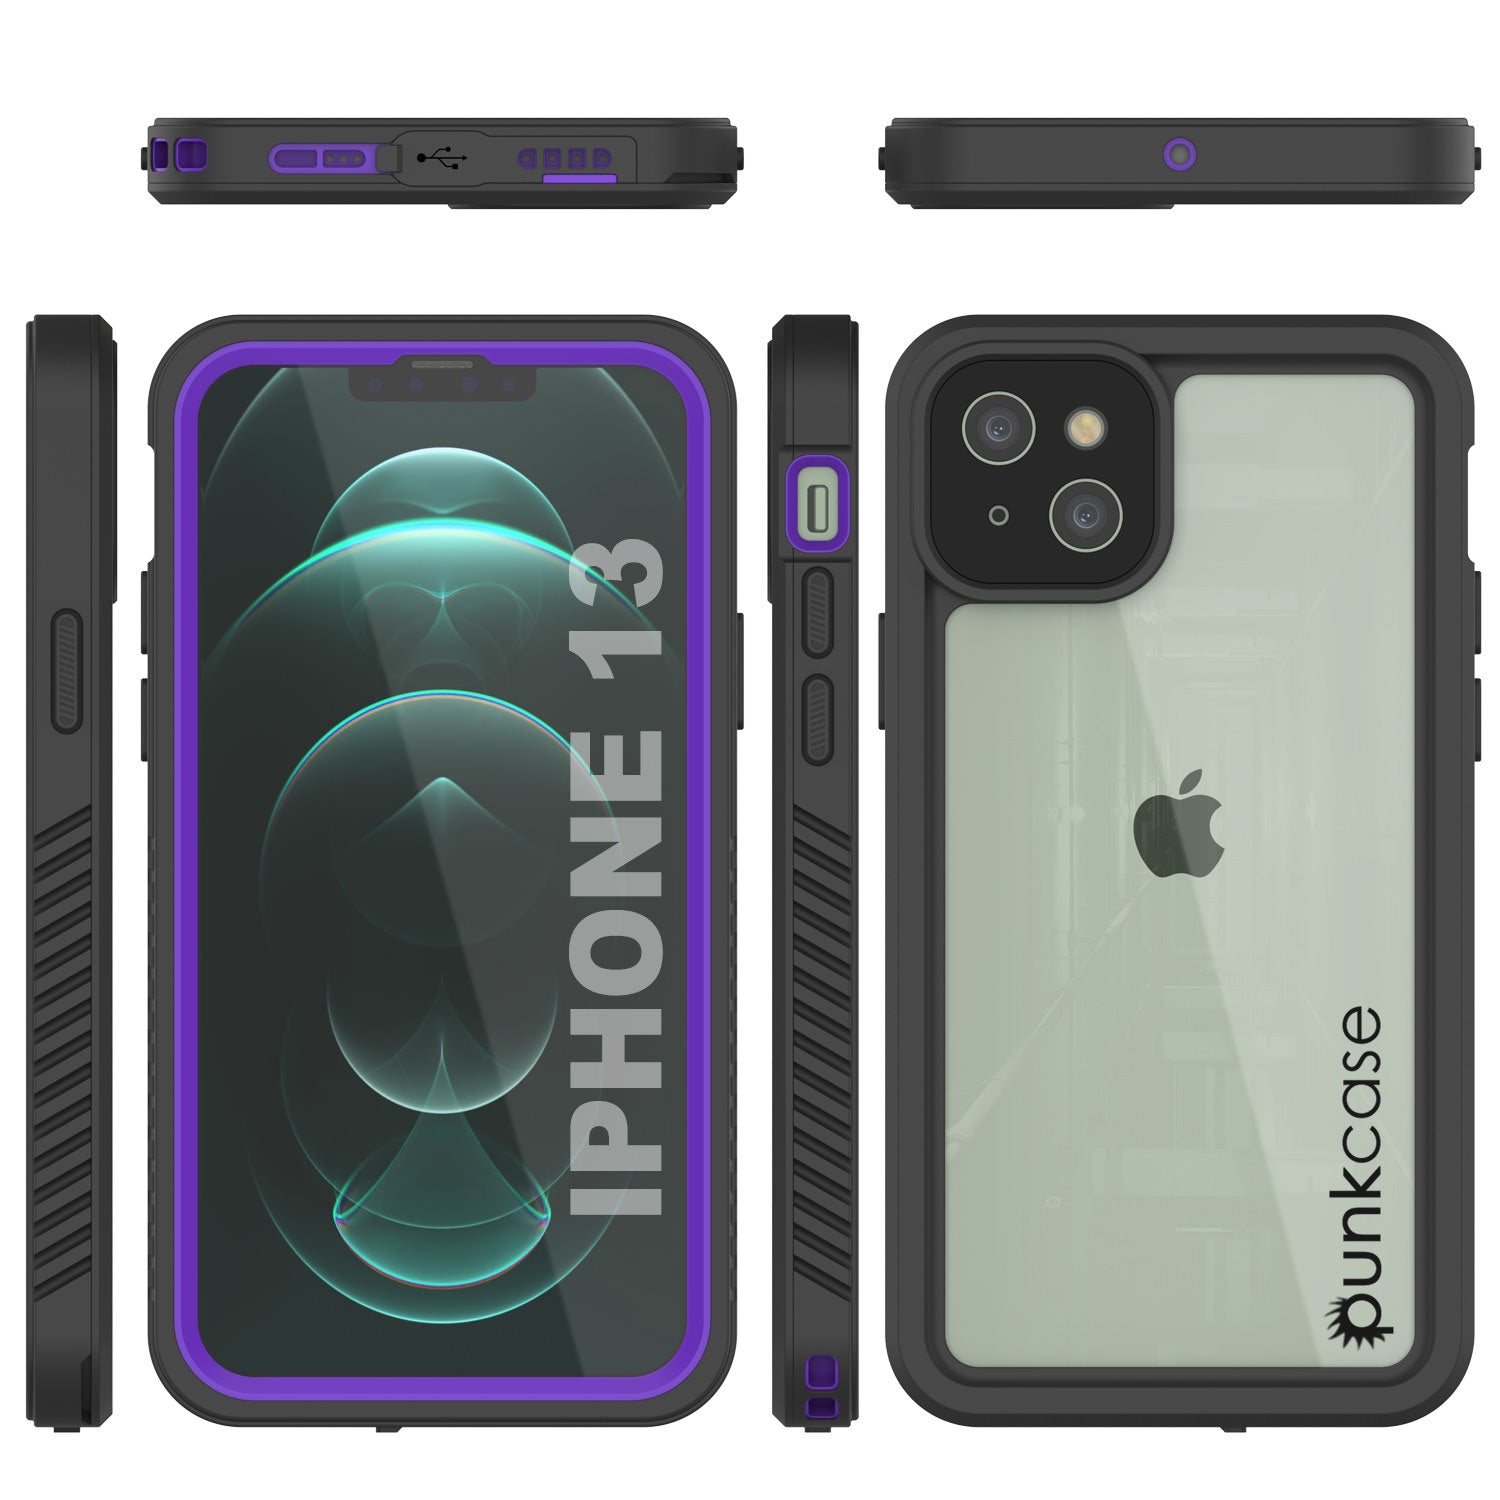 iPhone 13  Waterproof Case, Punkcase [Extreme Series] Armor Cover W/ Built In Screen Protector [Purple]